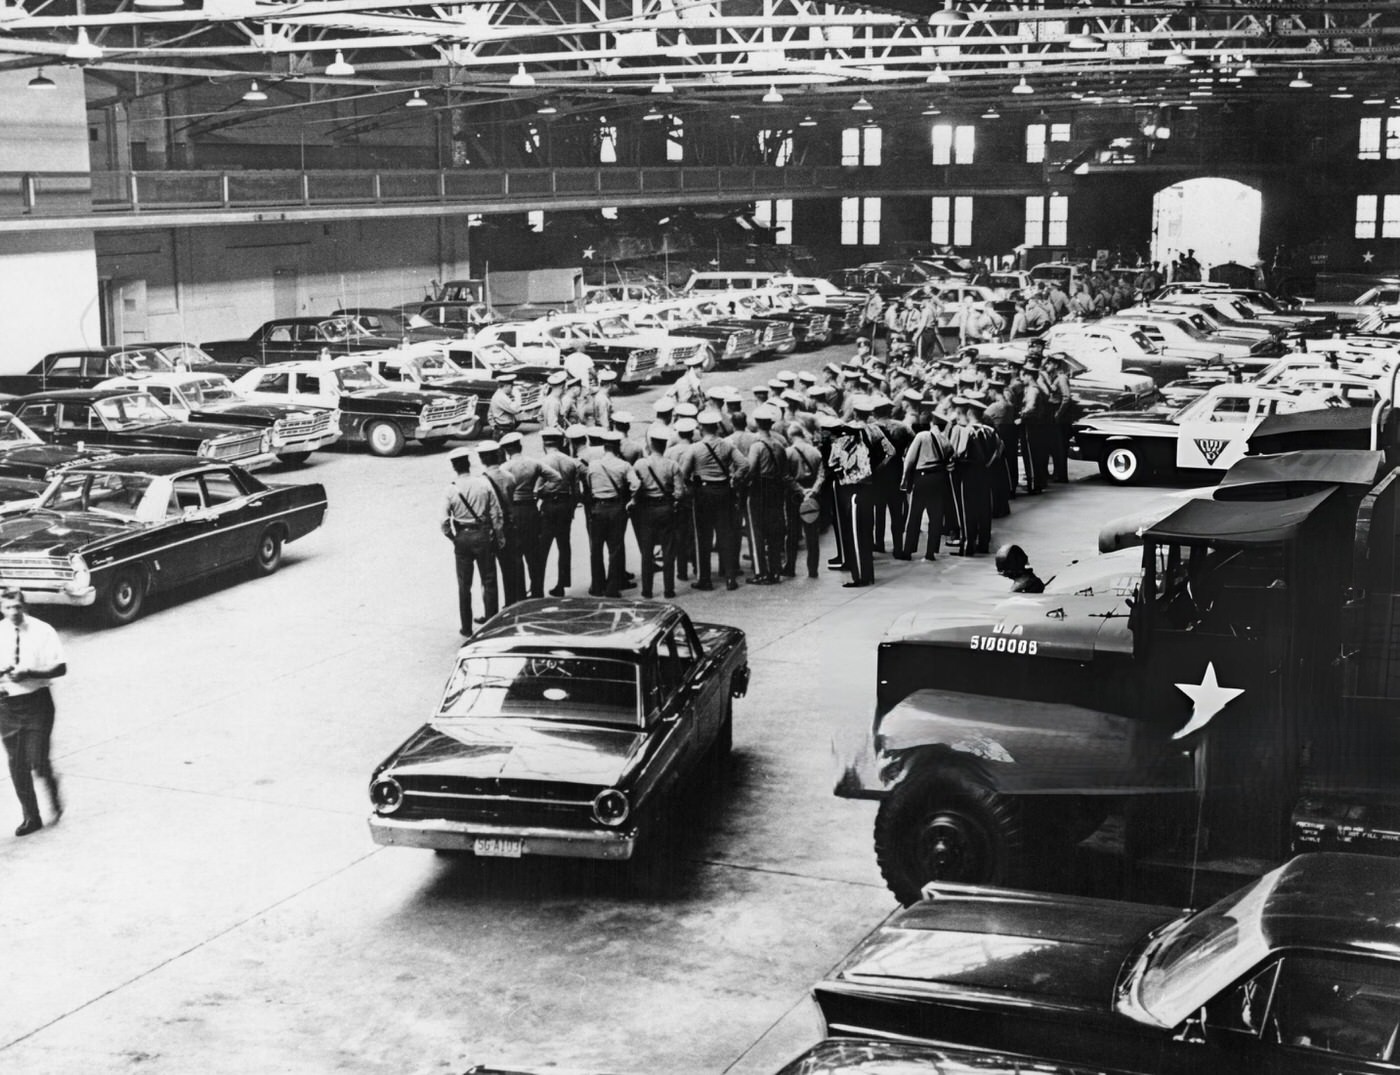 Newark police briefing officers in a warehouse before they head out into the riots taking place in Newark, New Jersey, 1960s.